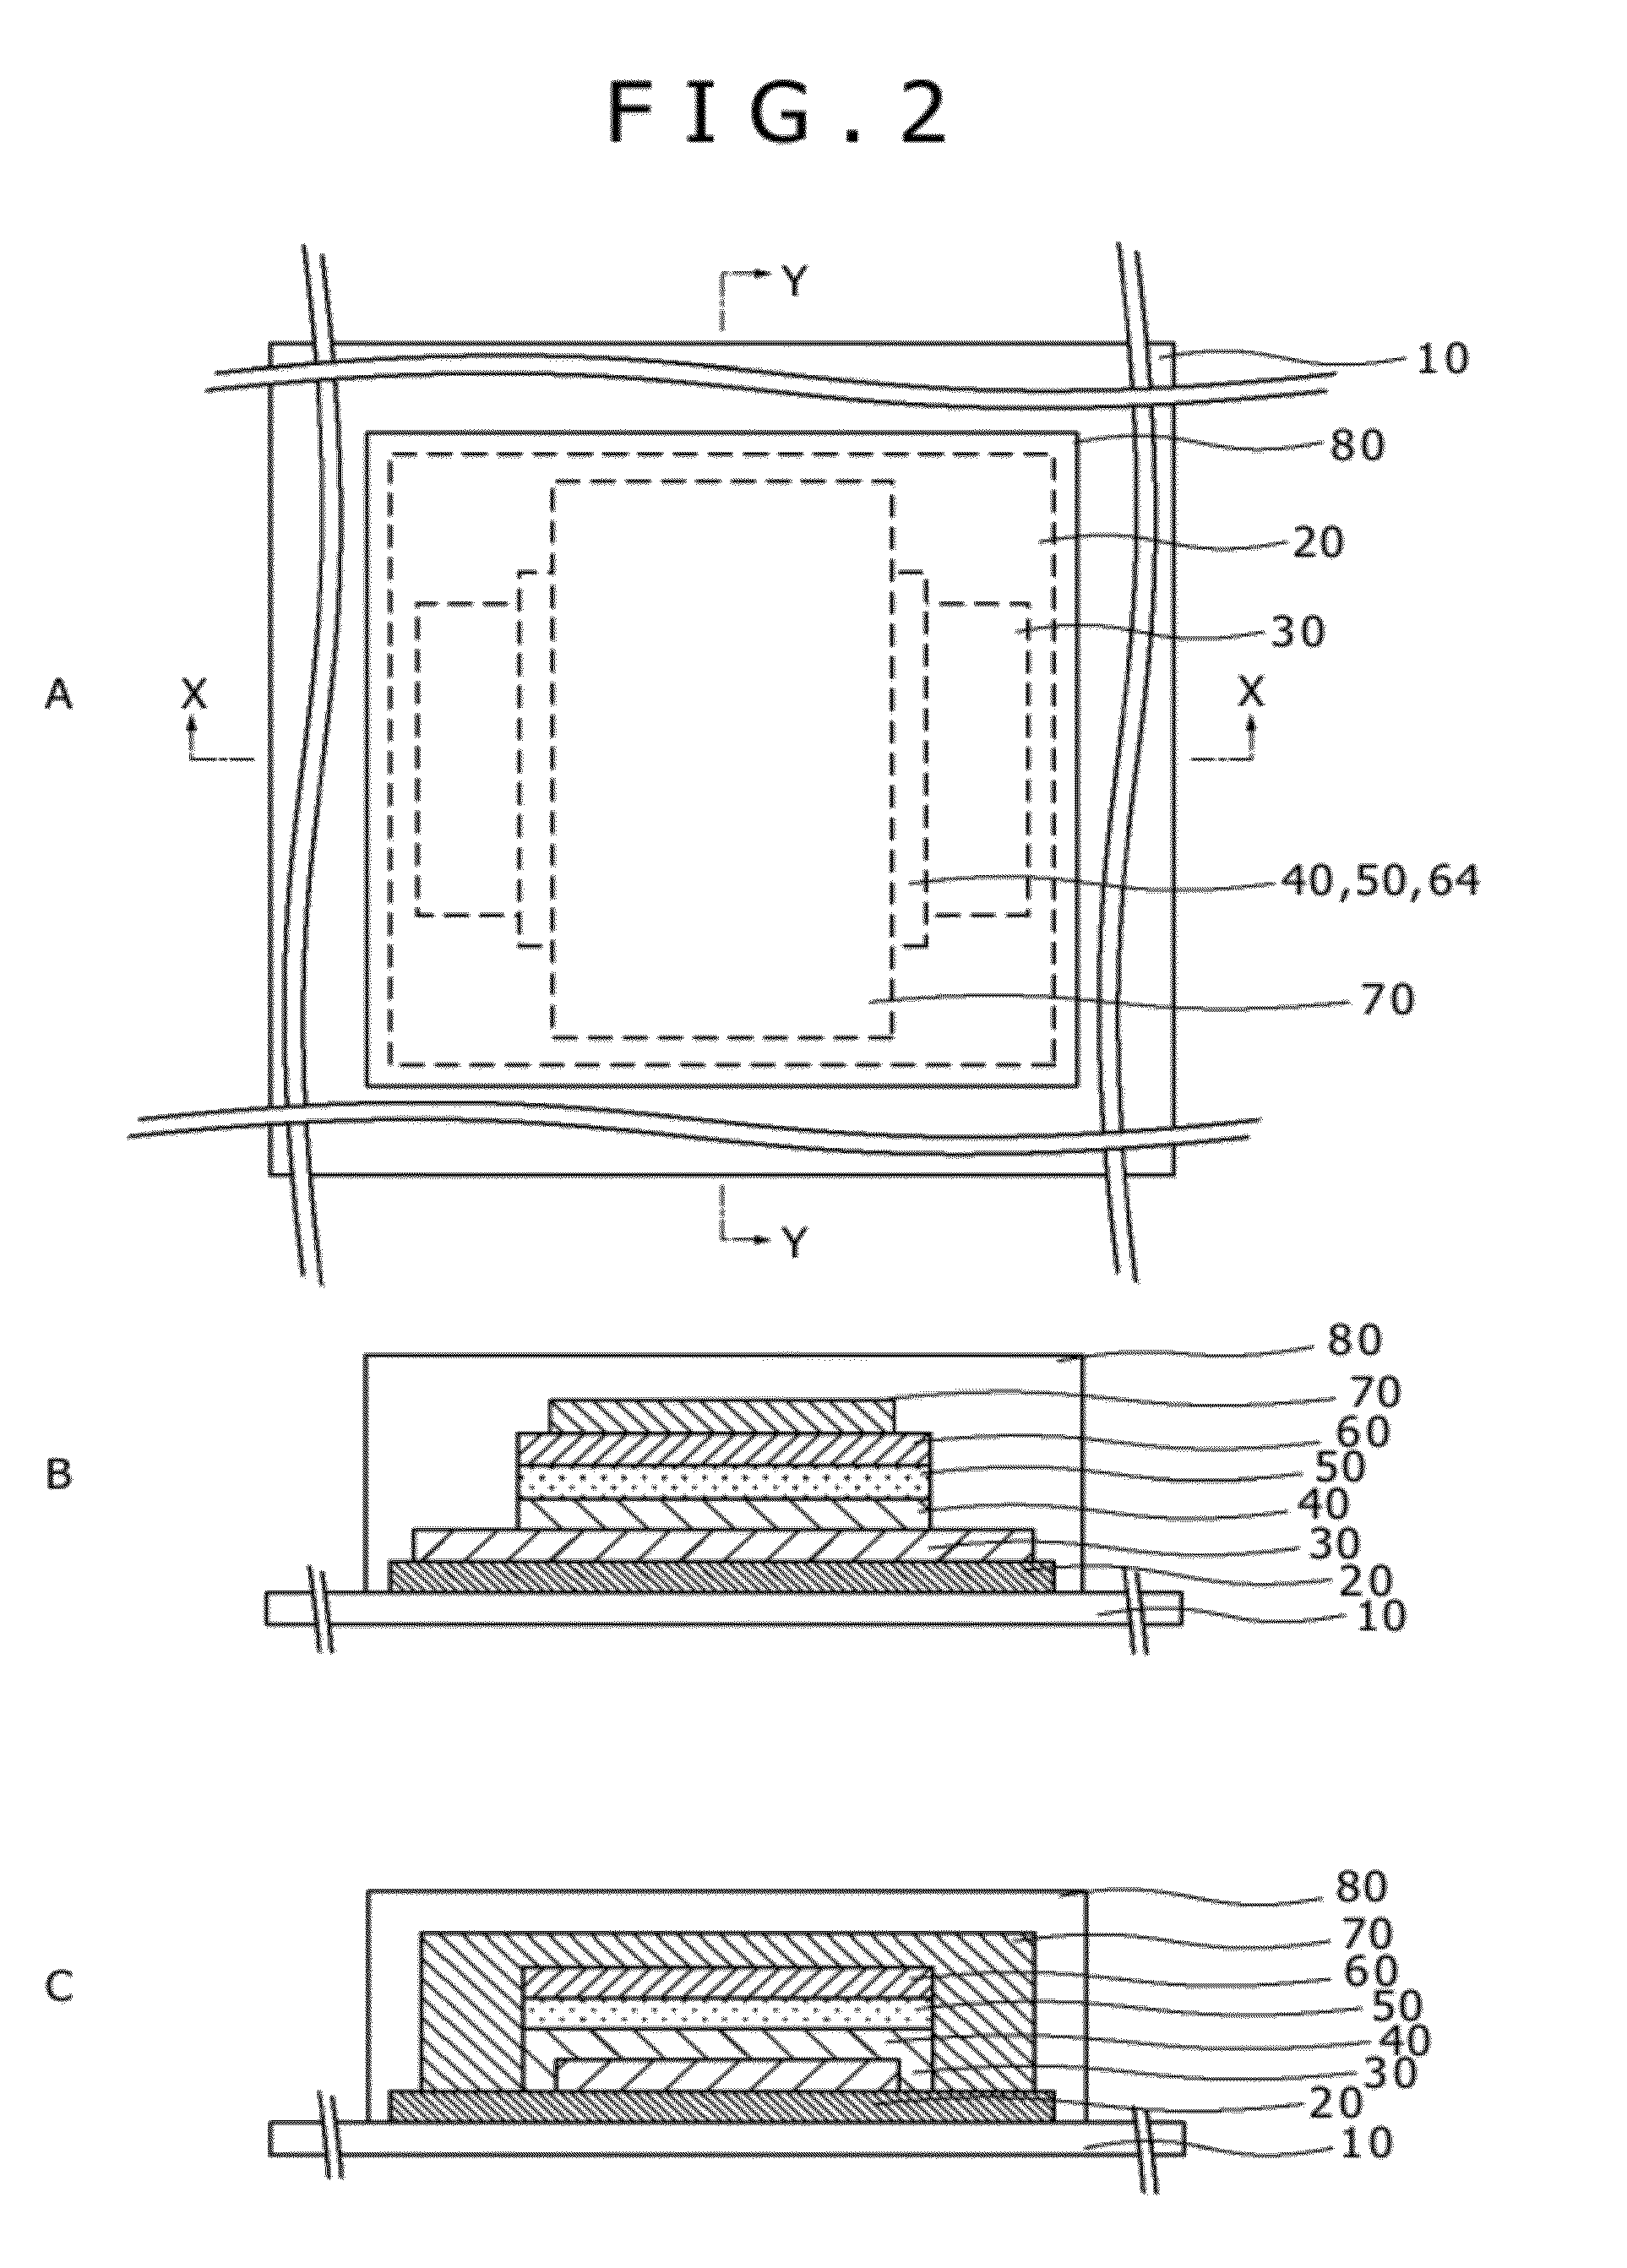 Solid-state electrolyte battery and cathode activating substance